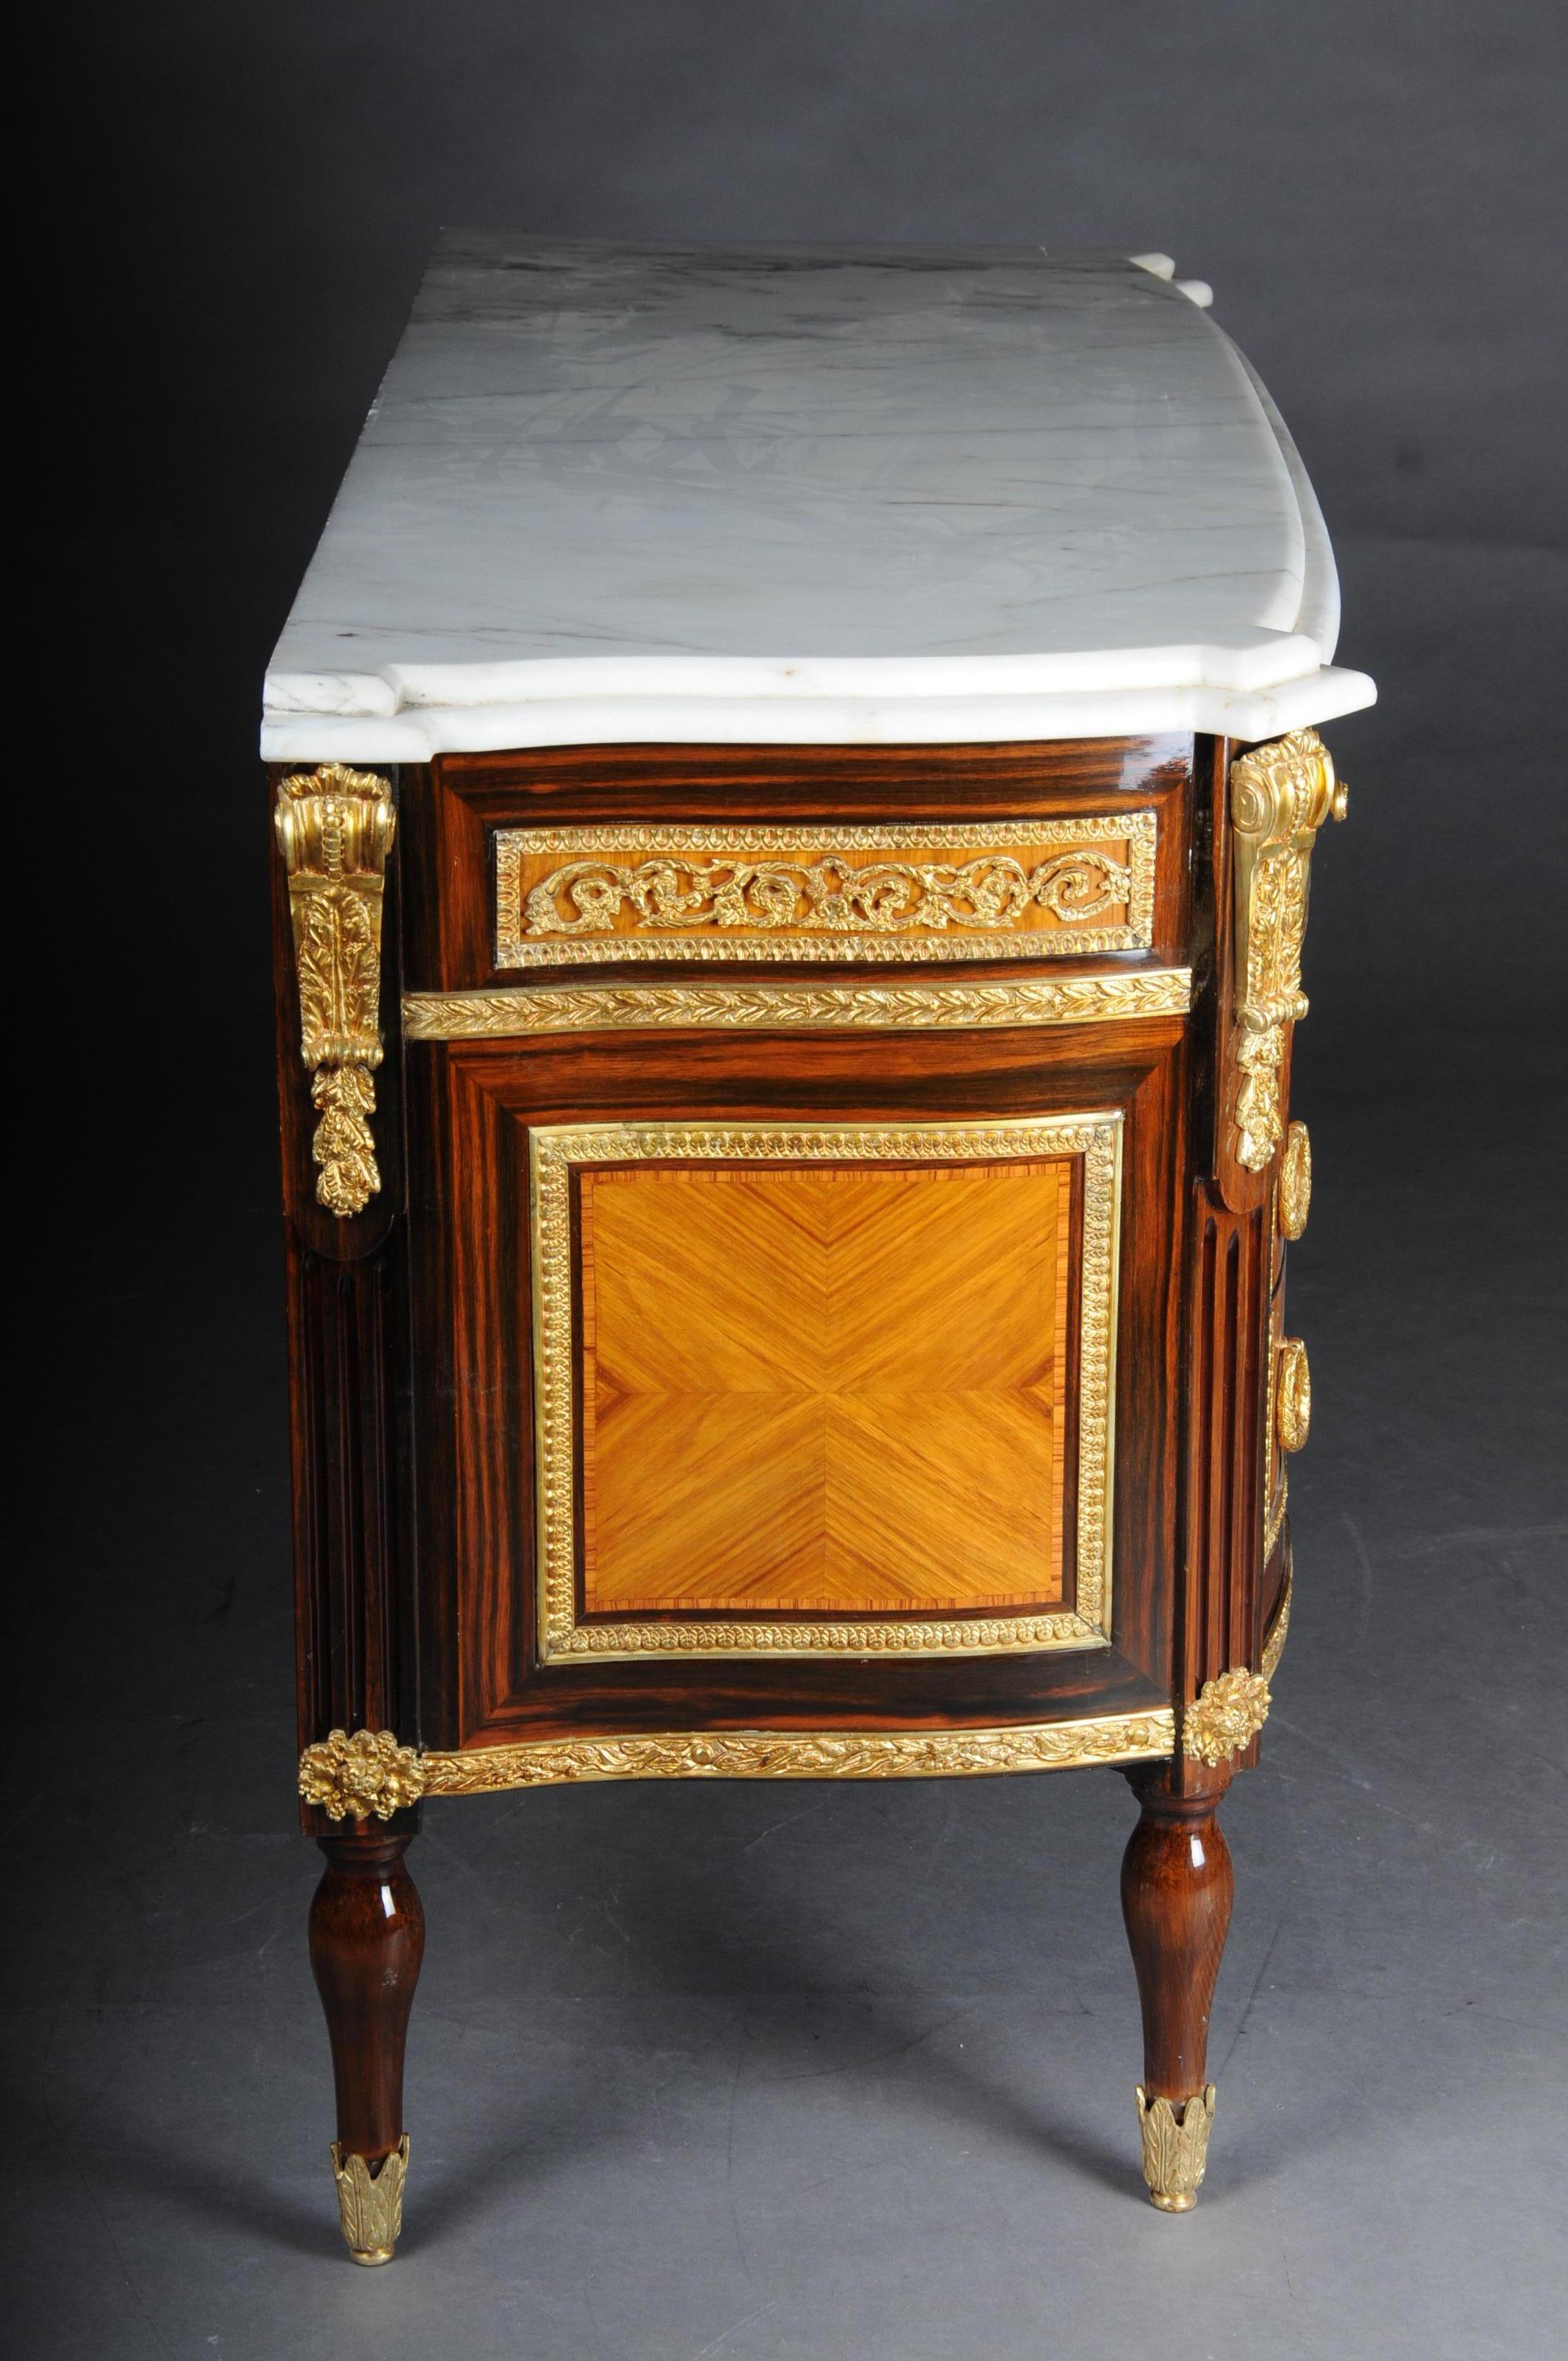 Impressive Chest of Drawers Sideboard in Louis XVI 4